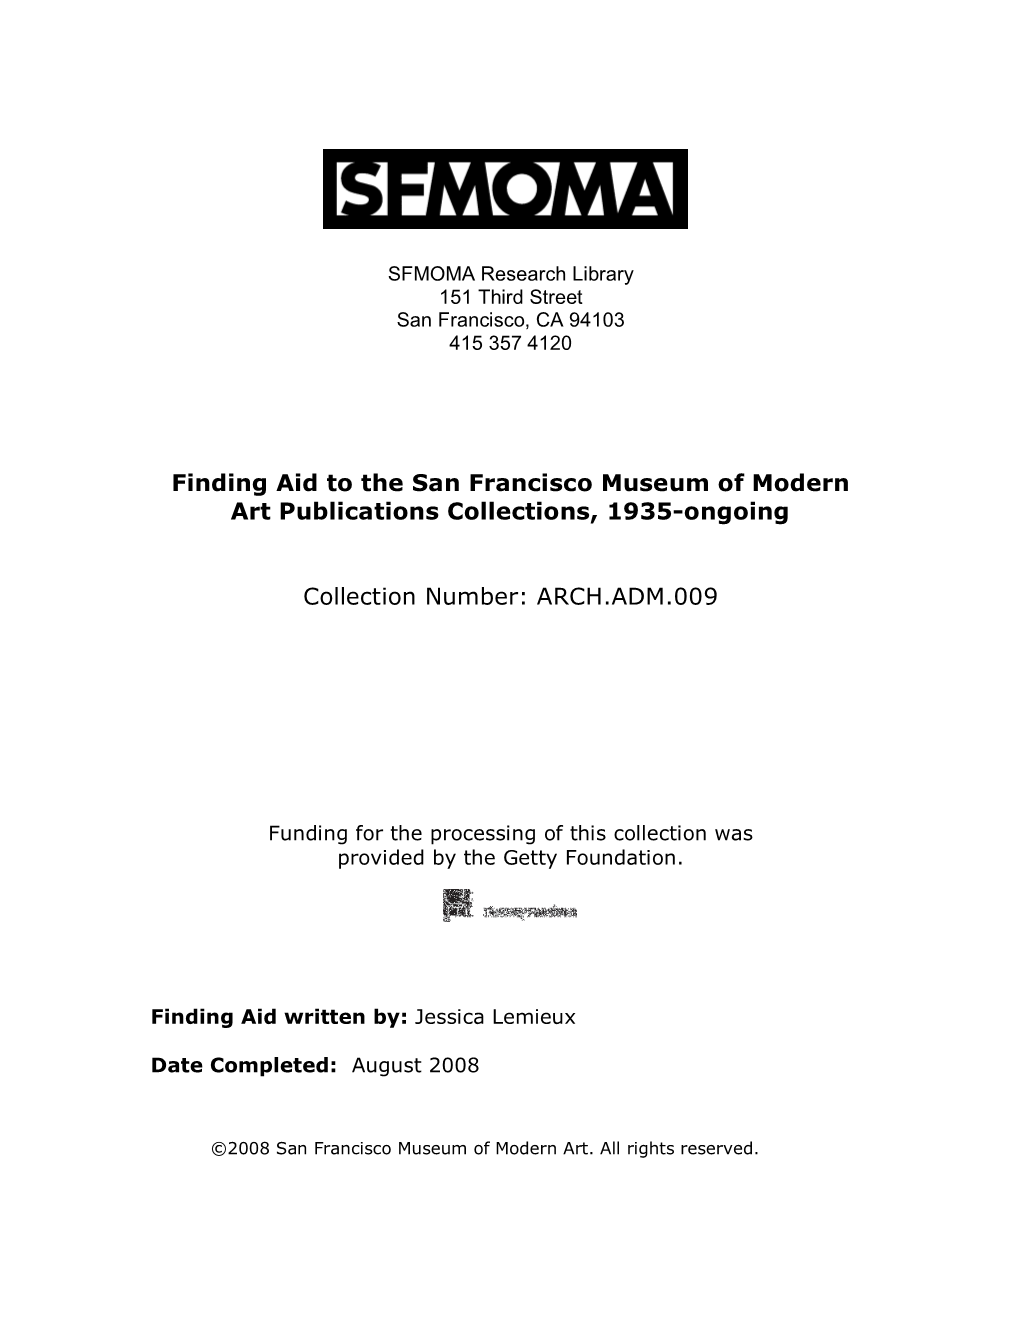 Finding Aid to the San Francisco Museum of Modern Art Publications Collections, 1935-Ongoing